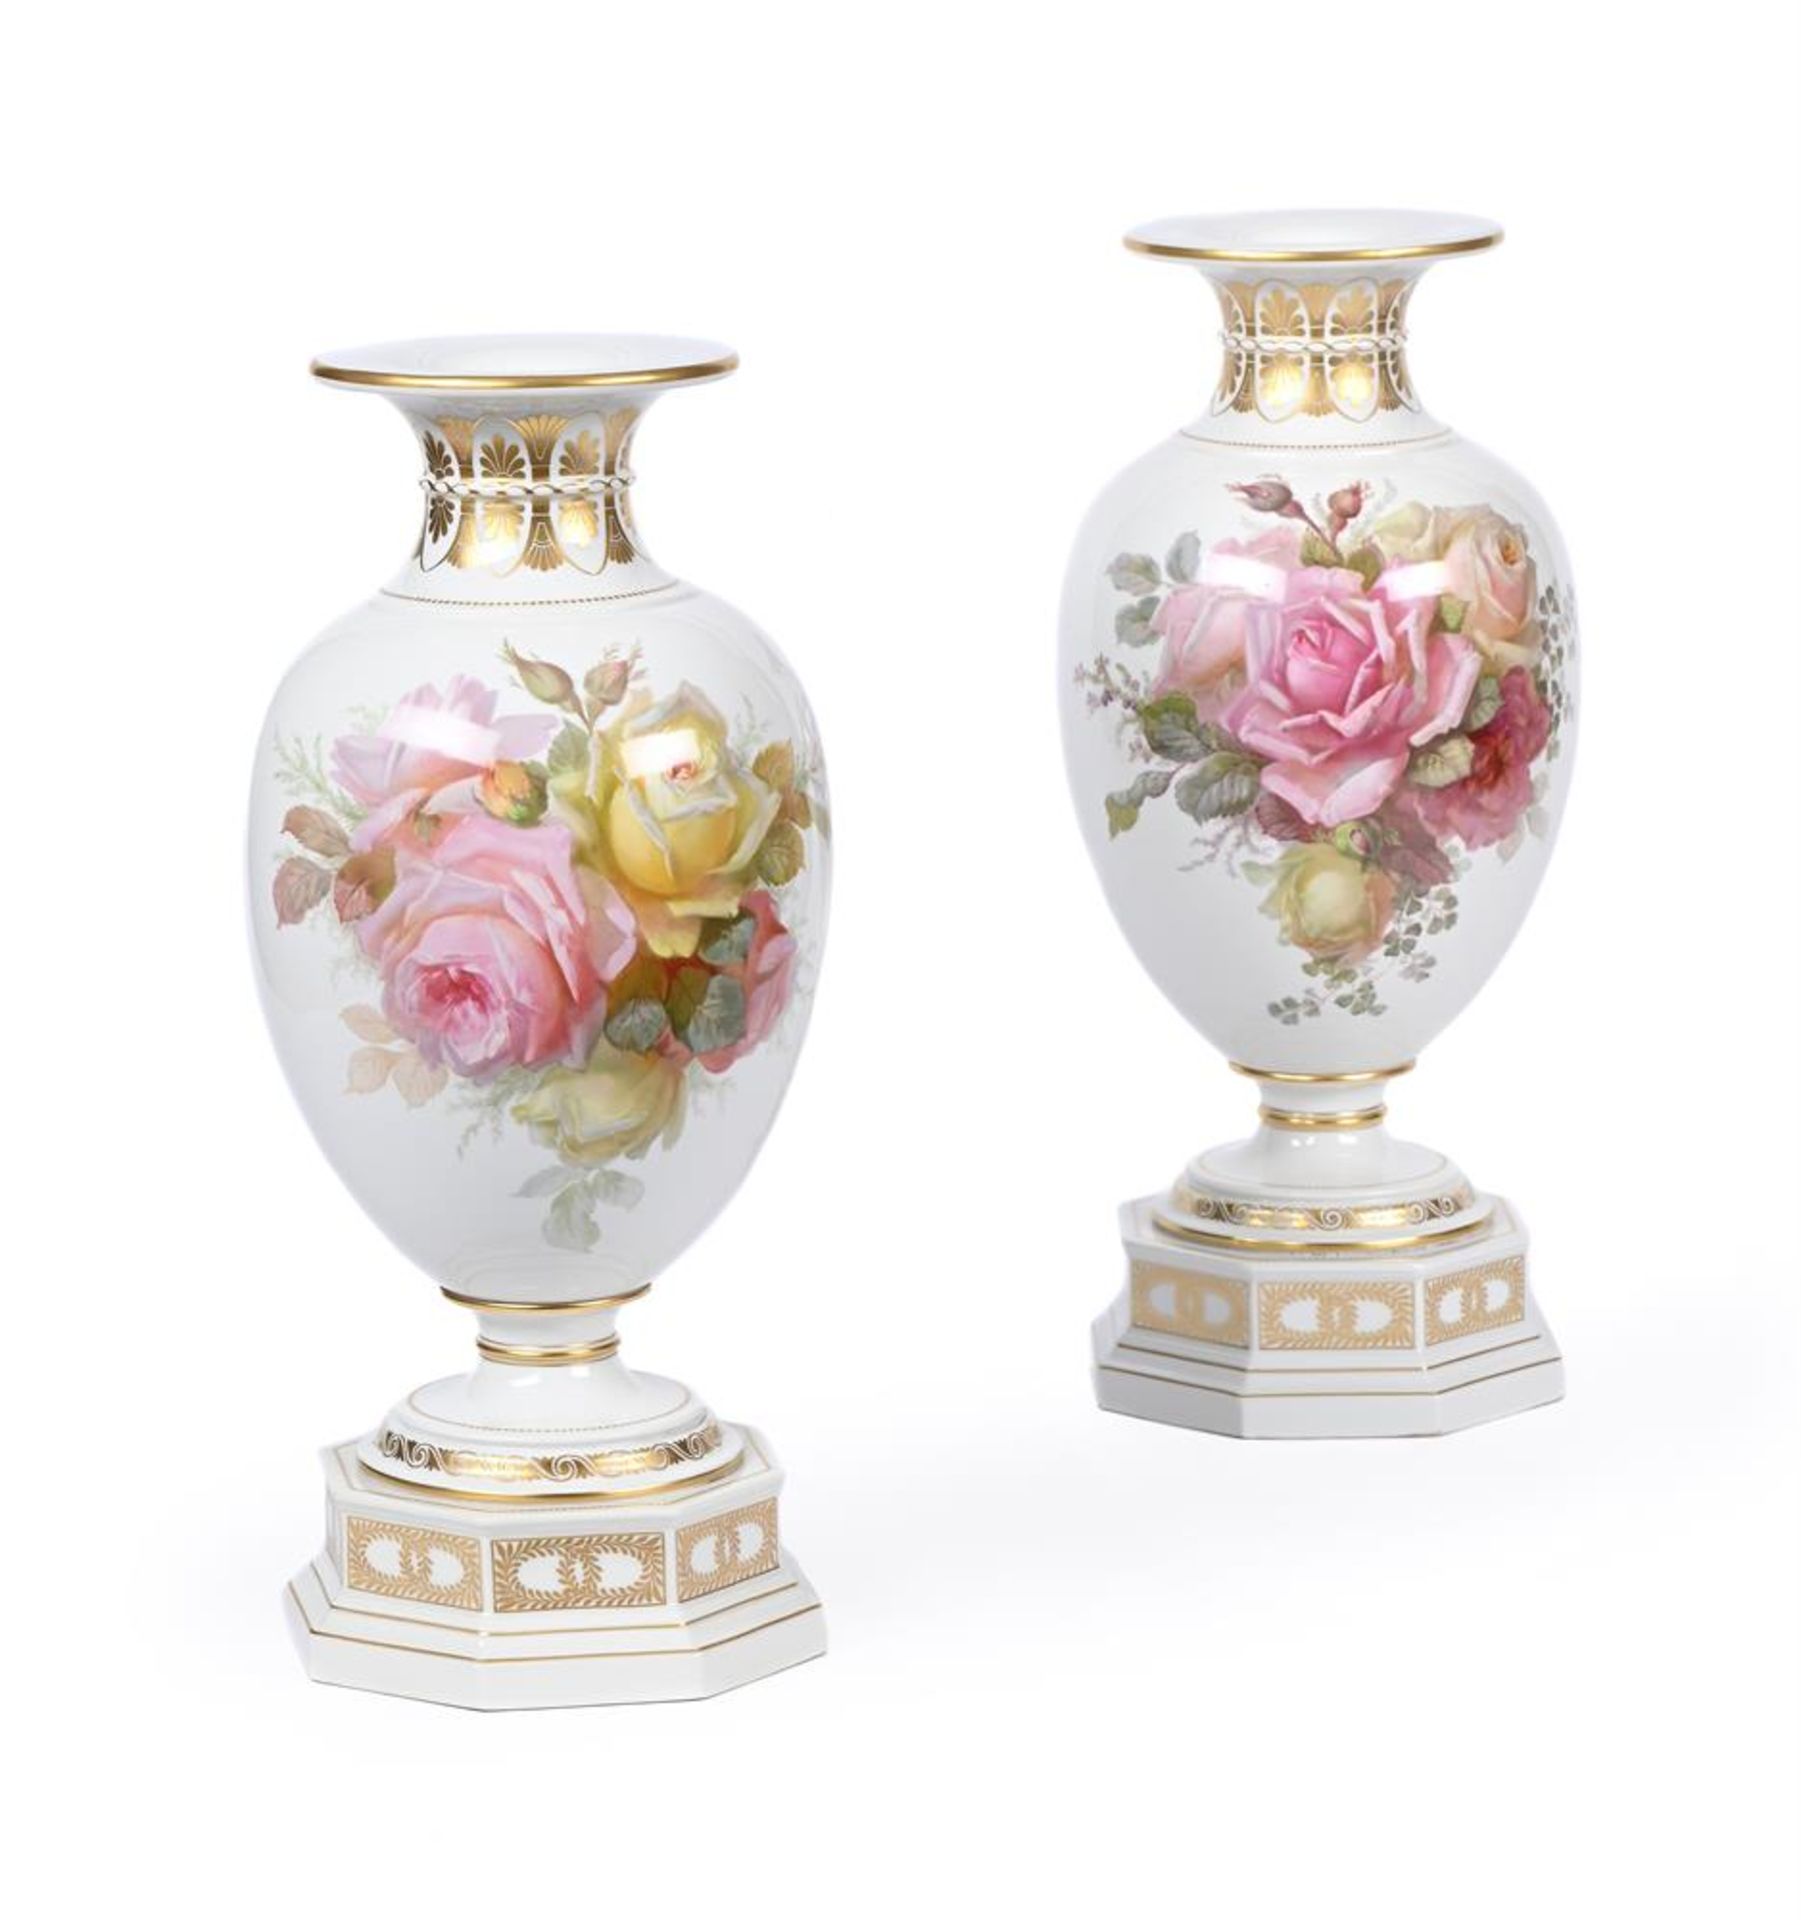 A VERY NEAR PAIR OF BERLIN (KPM) PORCELAIN VASES, CIRCA 1900 - Image 4 of 6